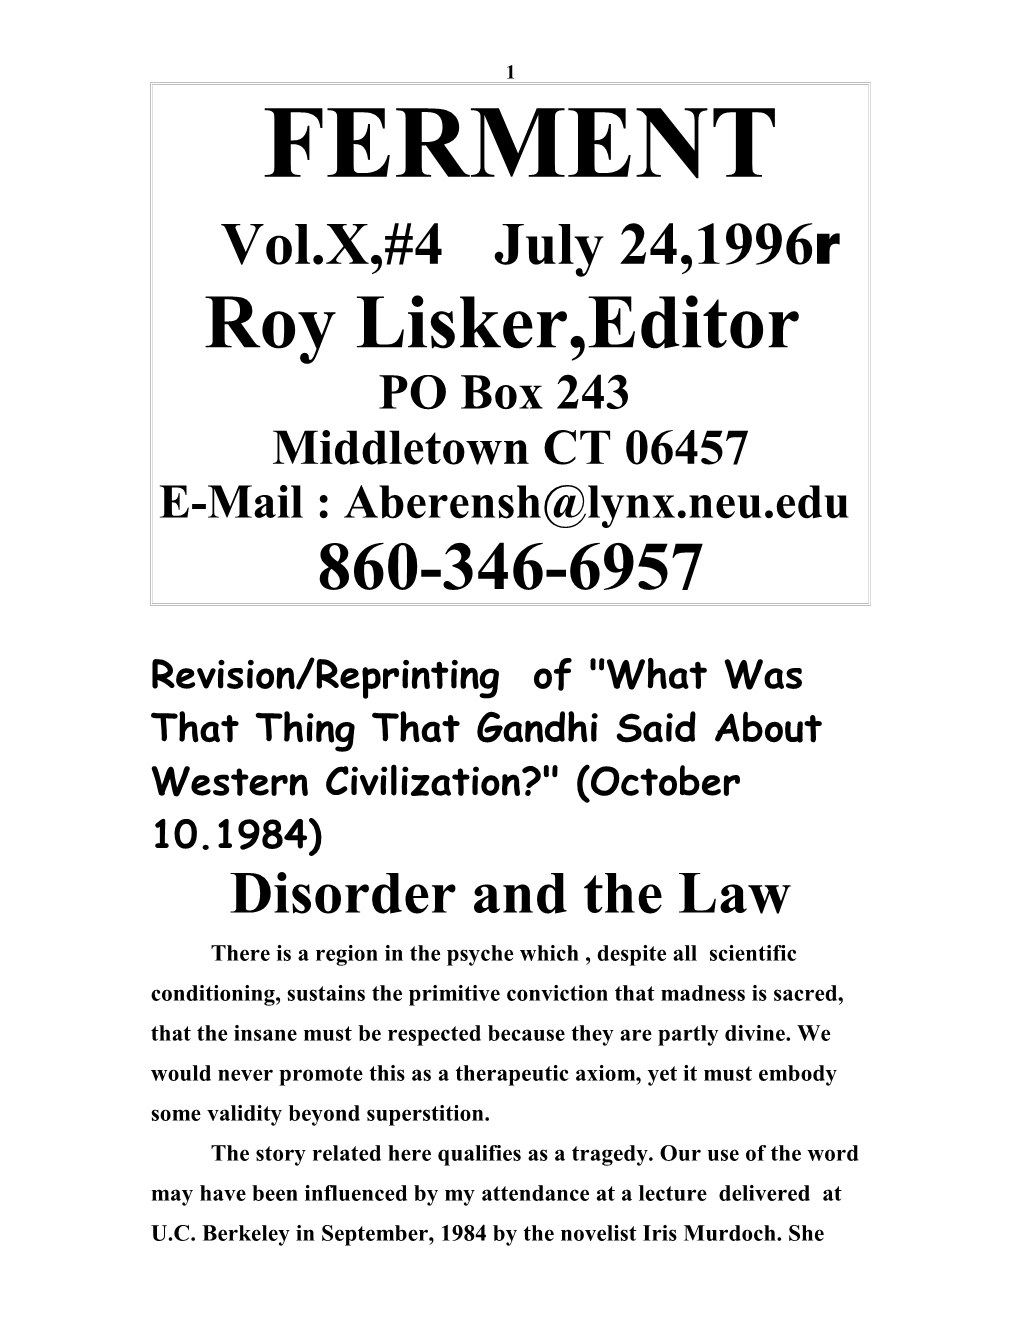 Disorder and the Law